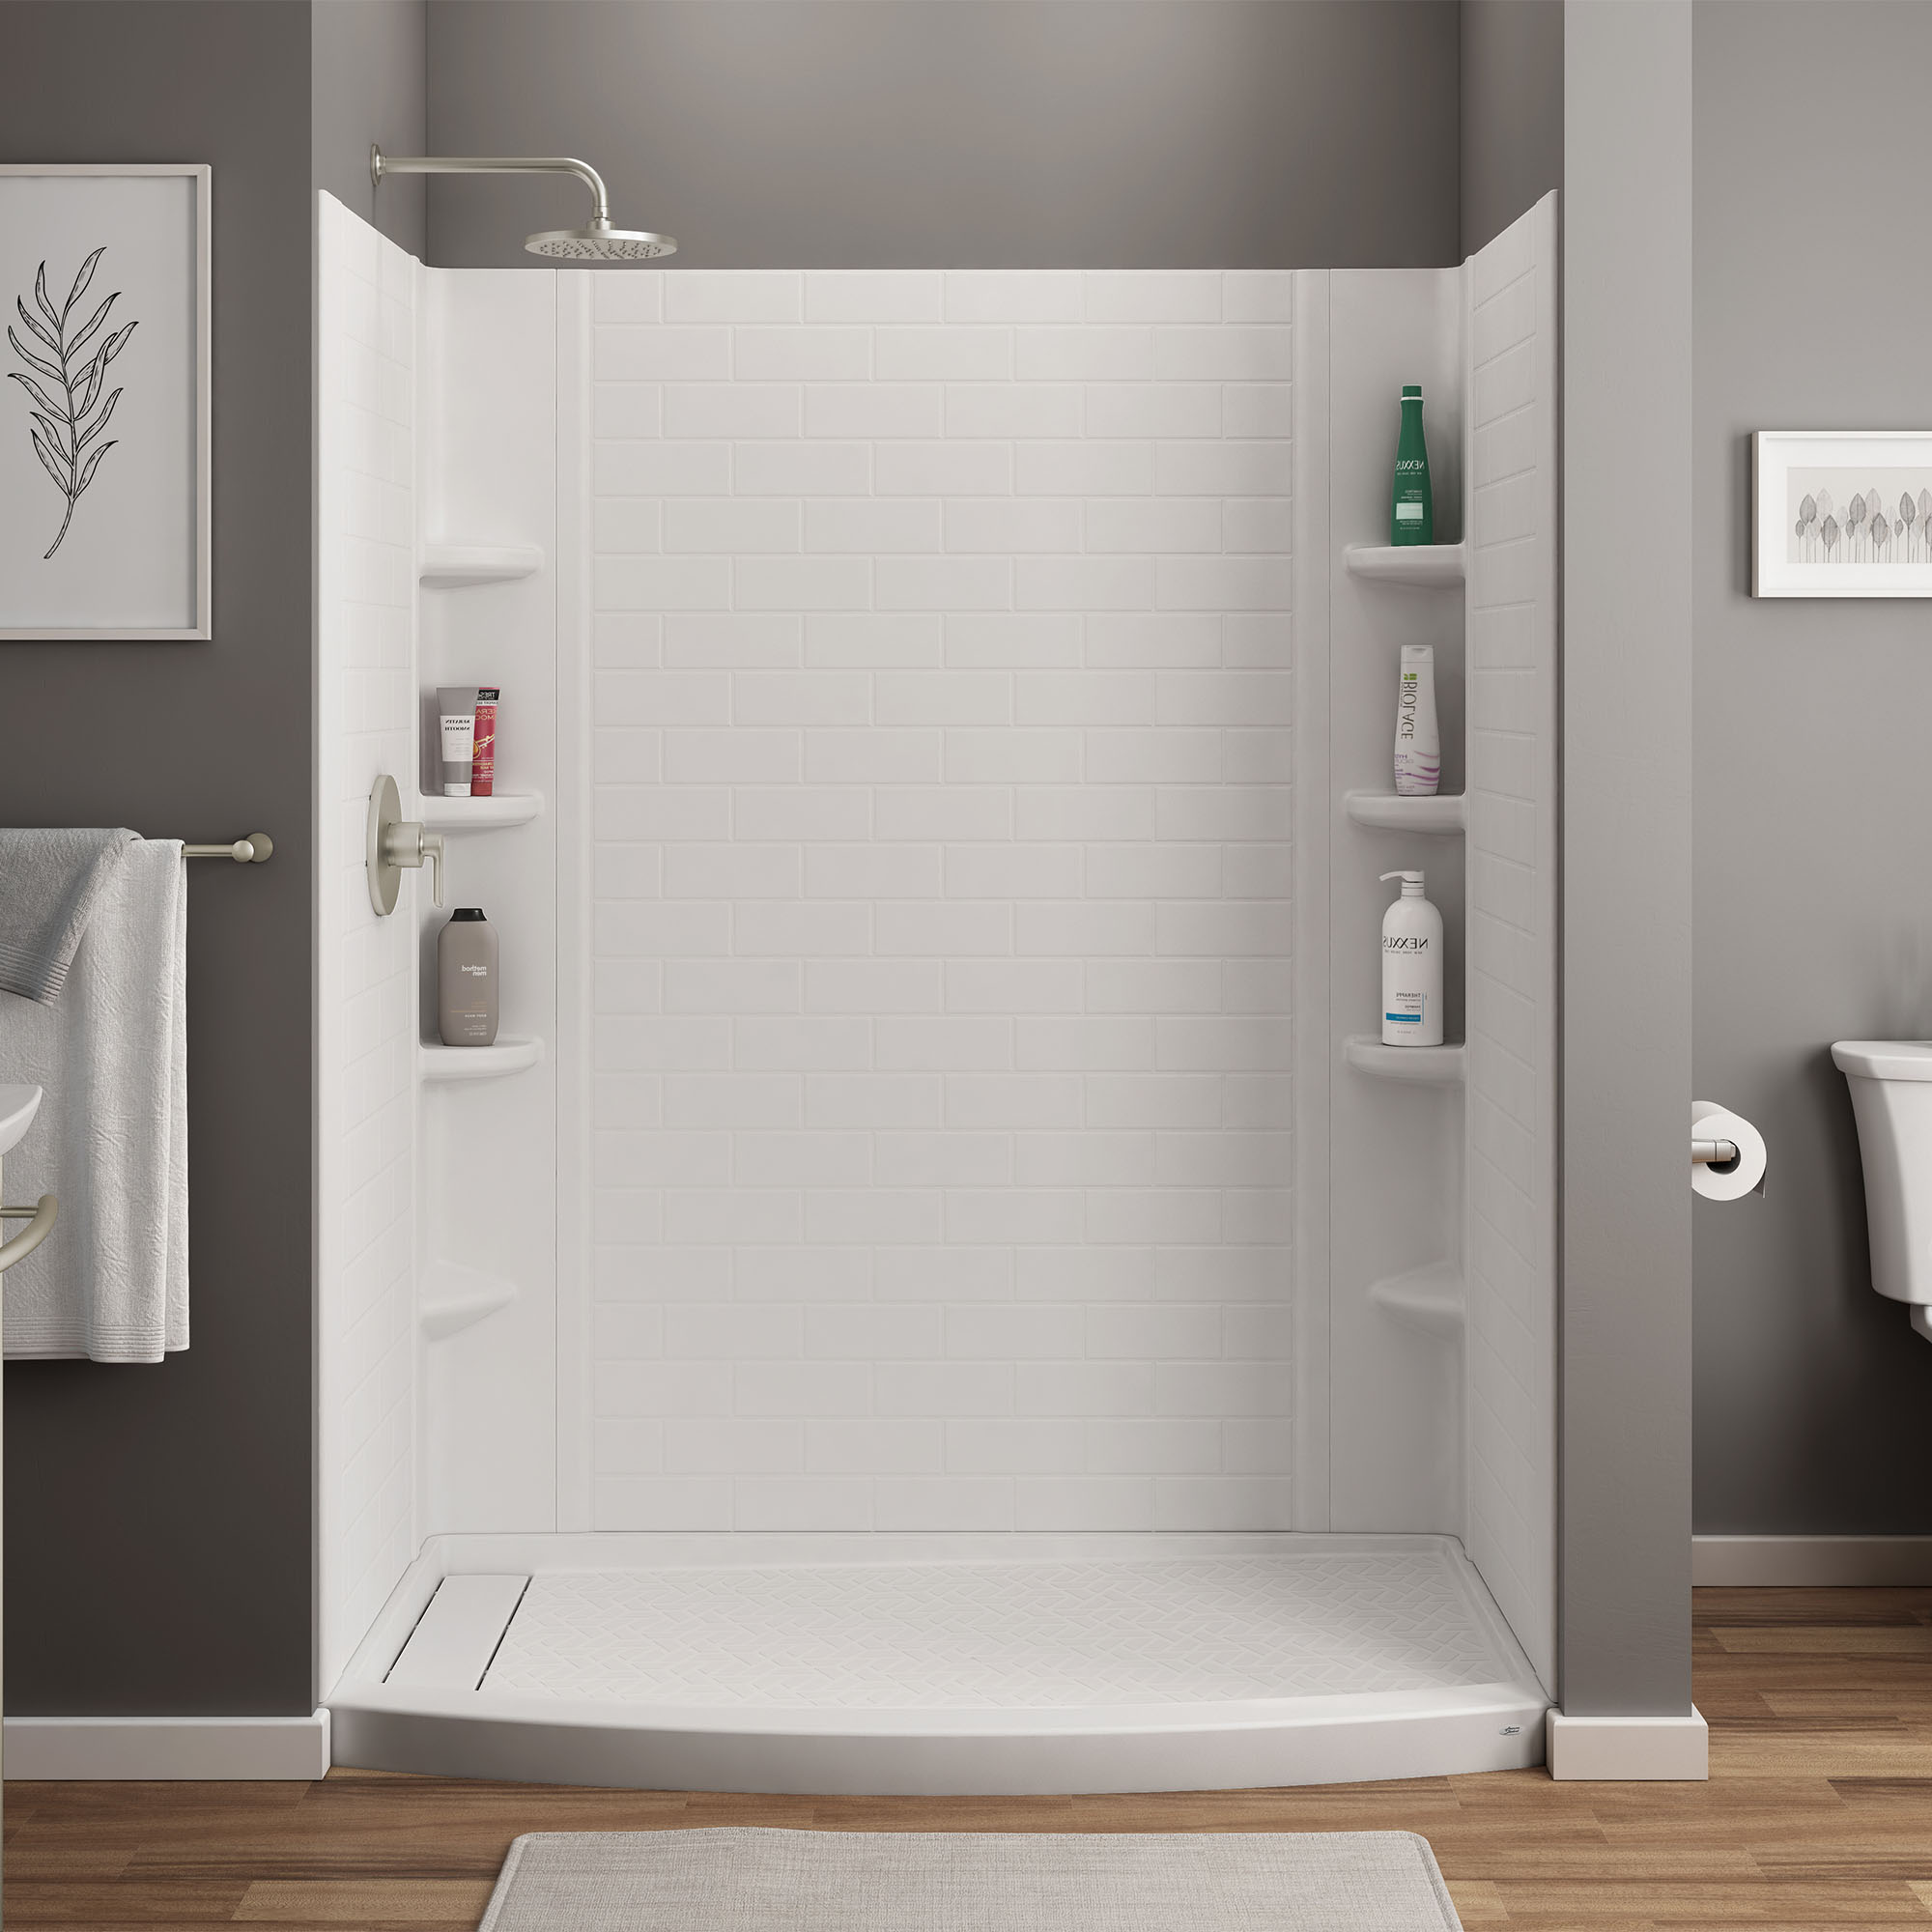 Elevate 60x30-inch Curved Shower Base with Left-hand Outlet